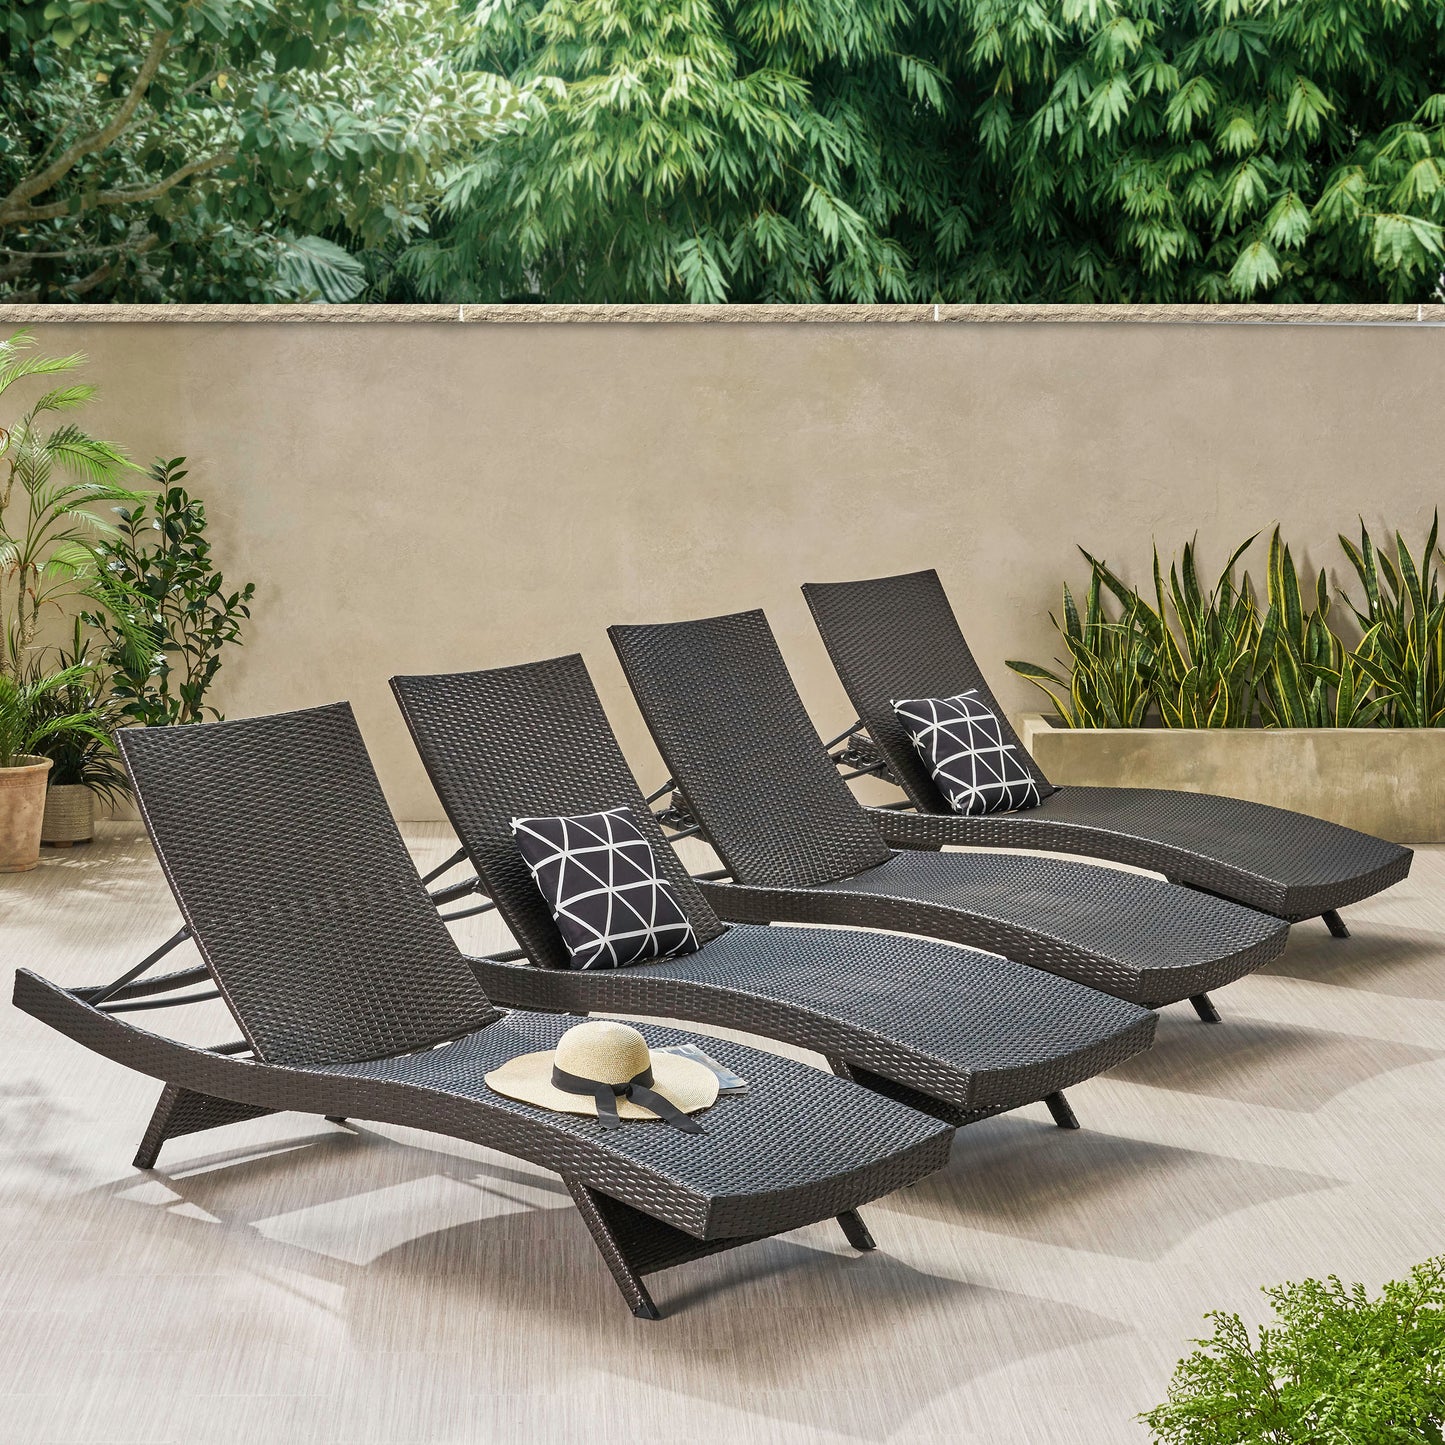 Set of 4 Luxury Outdoor Patio Furniture PE Wicker Chaise Lounge Chairs